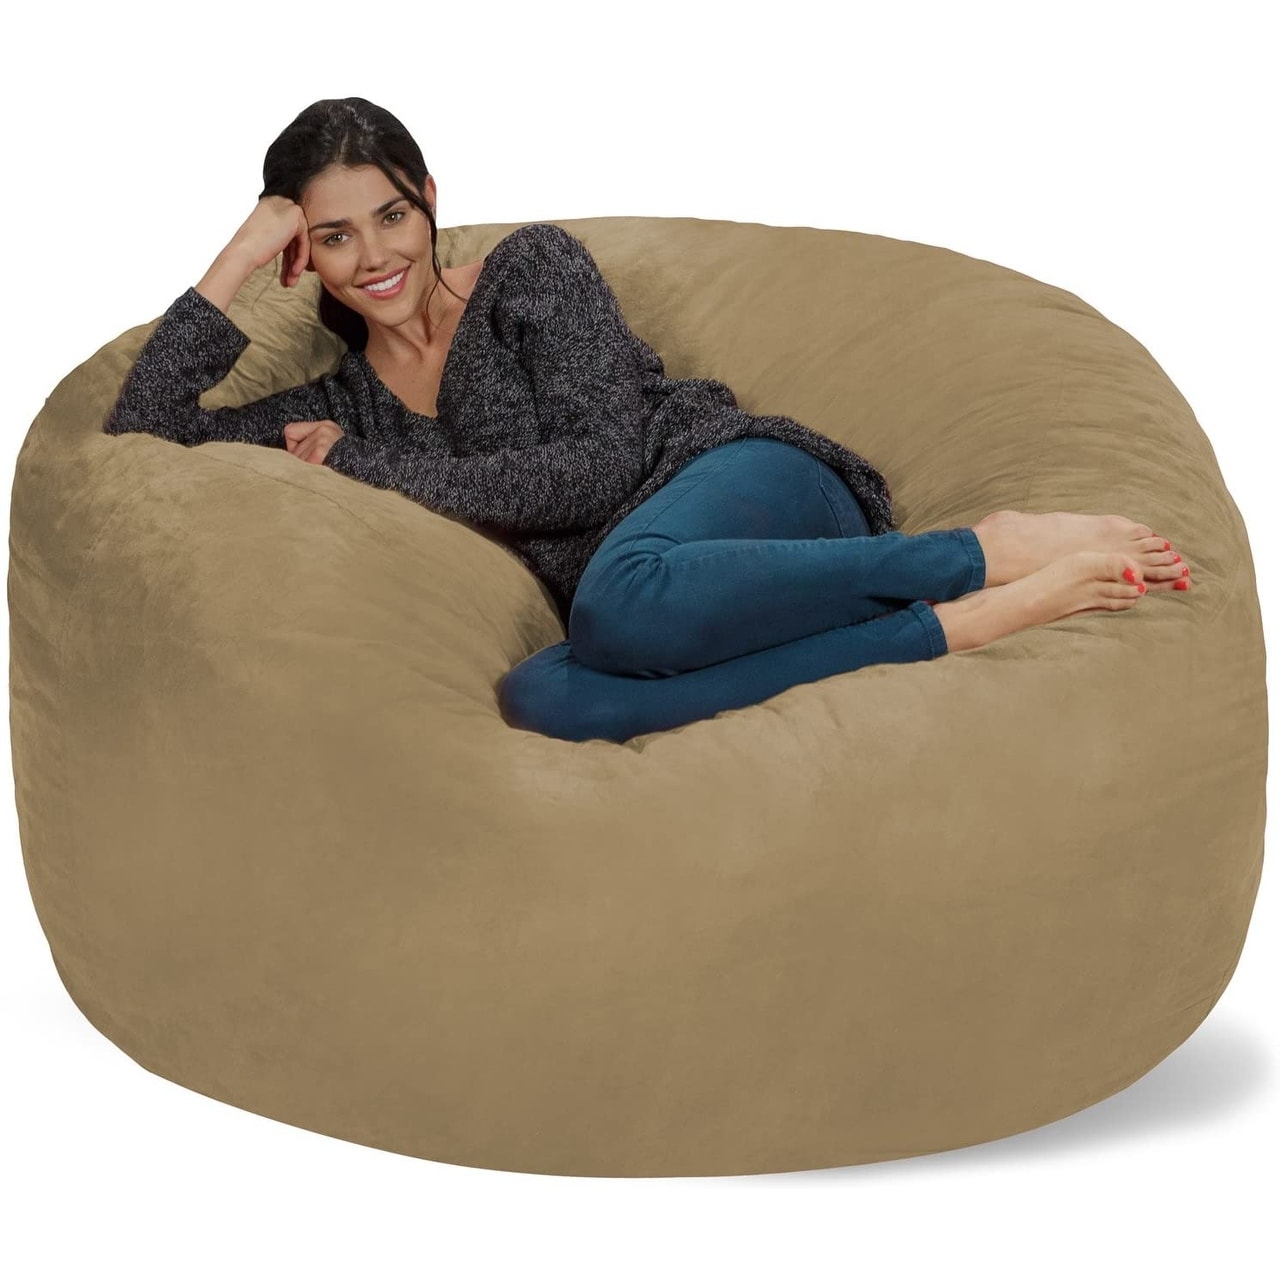 https://ak1.ostkcdn.com/images/products/is/images/direct/e13da0f20de05f2b415c0d09db877080729ed833/Bean-Bag-Chair-5-foot-Memory-Foam-Removable-Cover-Bean-Bags.jpg